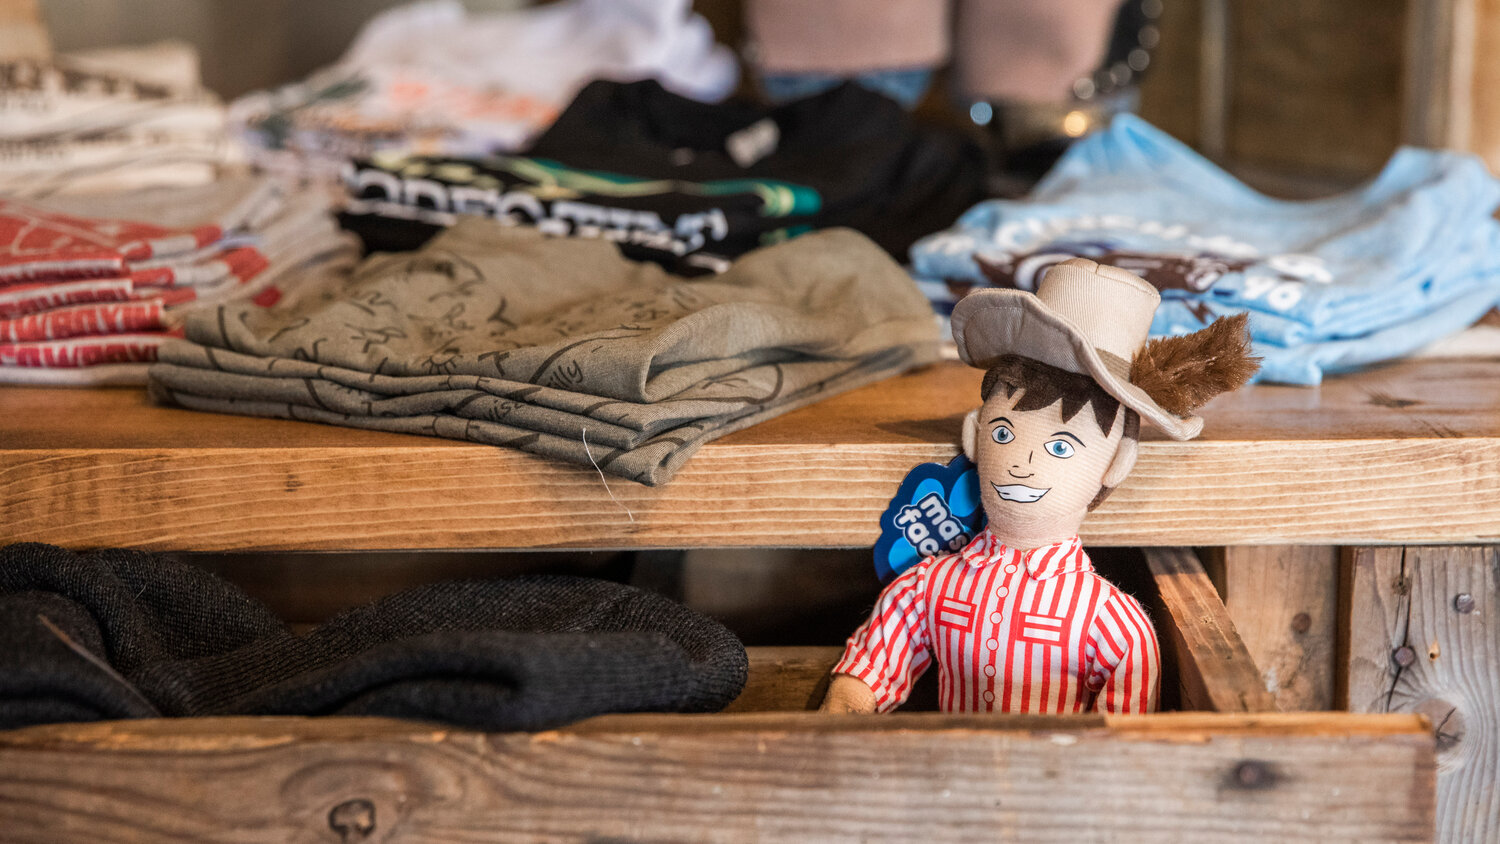 A cowboy doll is seen smiling inside Saddle Bum on Monday, May 8, in downtown Centralia.